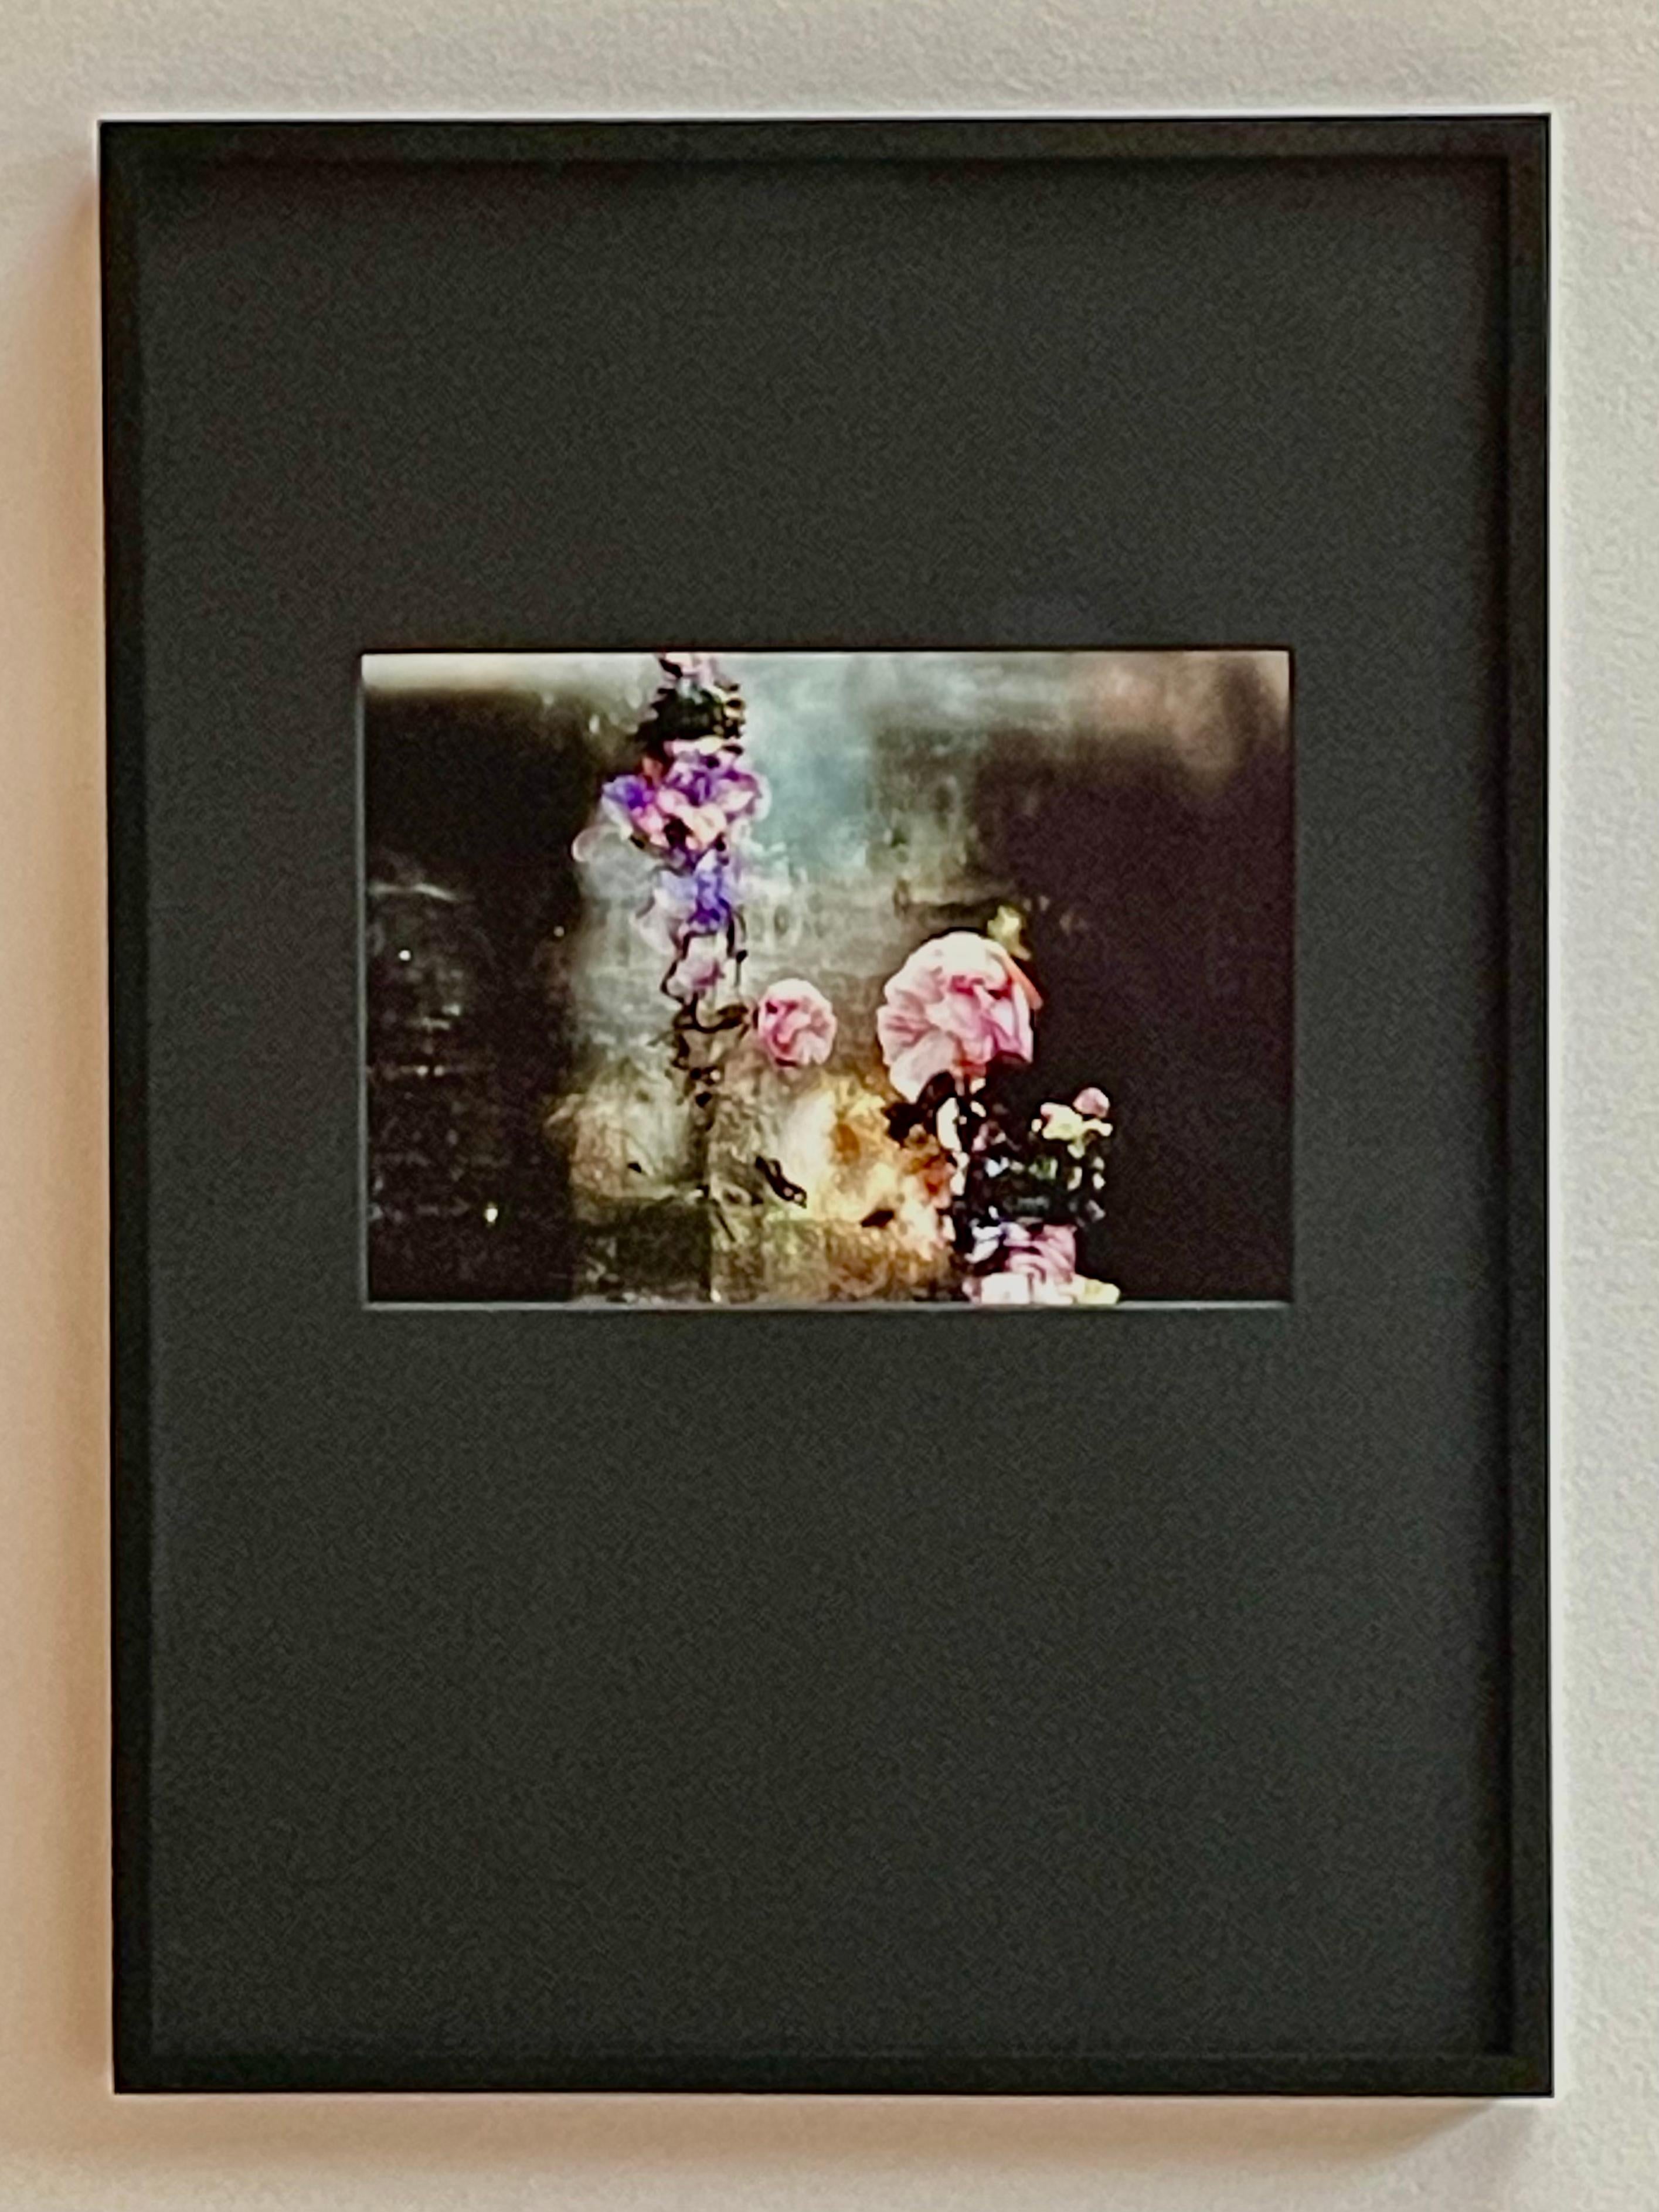 Conversation # 8  abstract black pink blue still life floral framed photograph - Photograph by Isabelle Menin